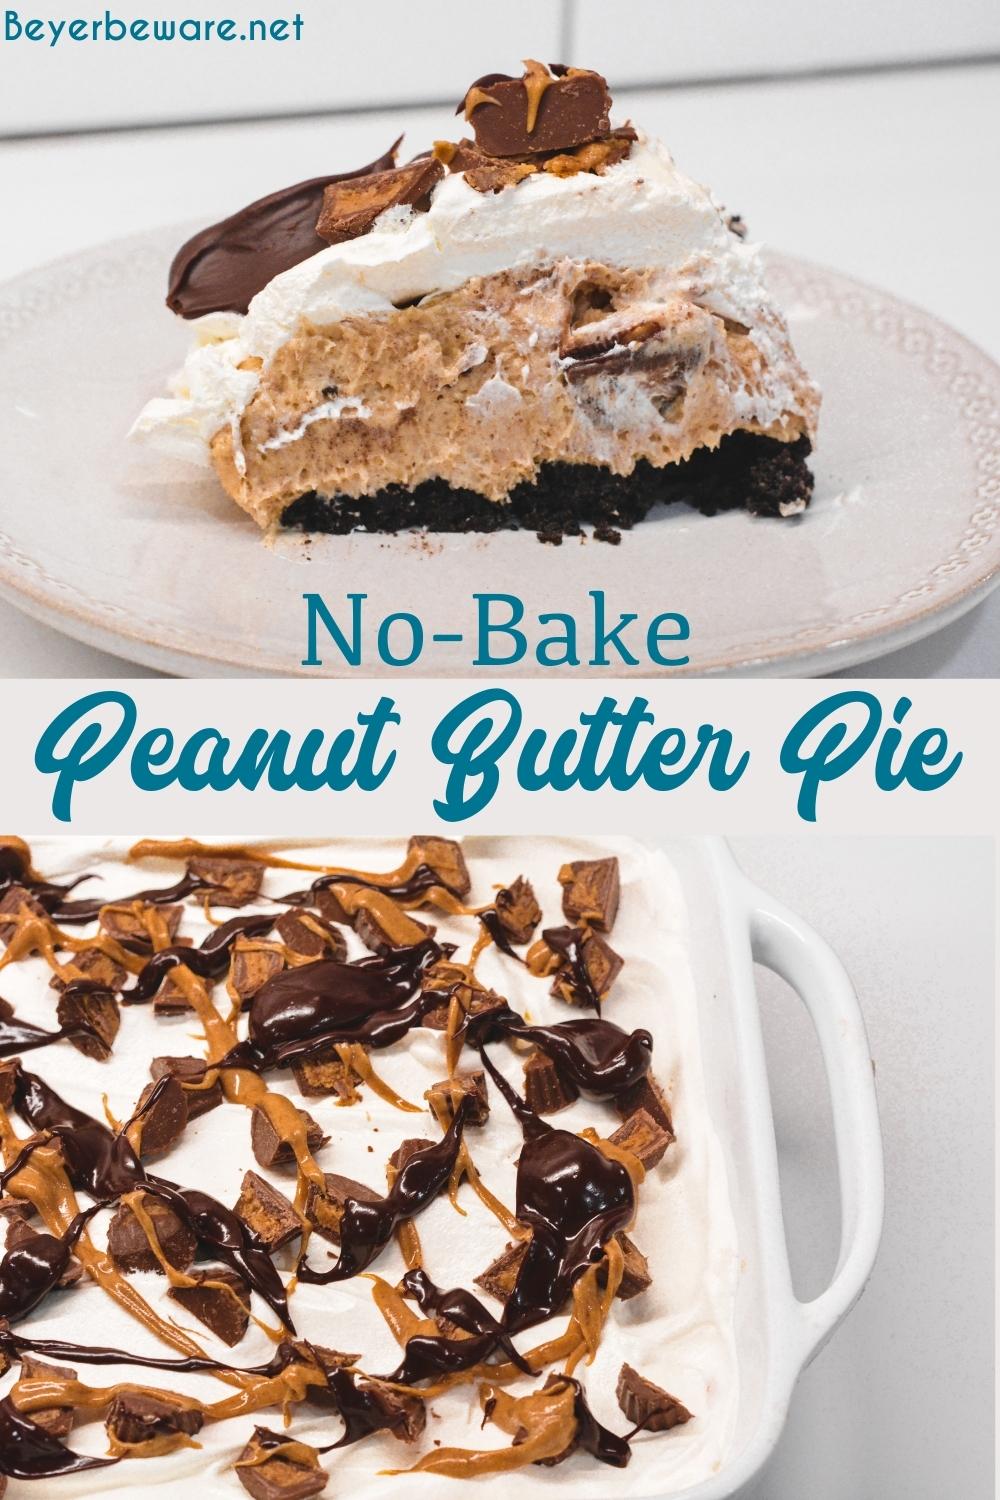 No-bake peanut butter pie recipe is a full pan size dessert layered with an Oreo crust, creamy peanut filling, and cool whip topping.